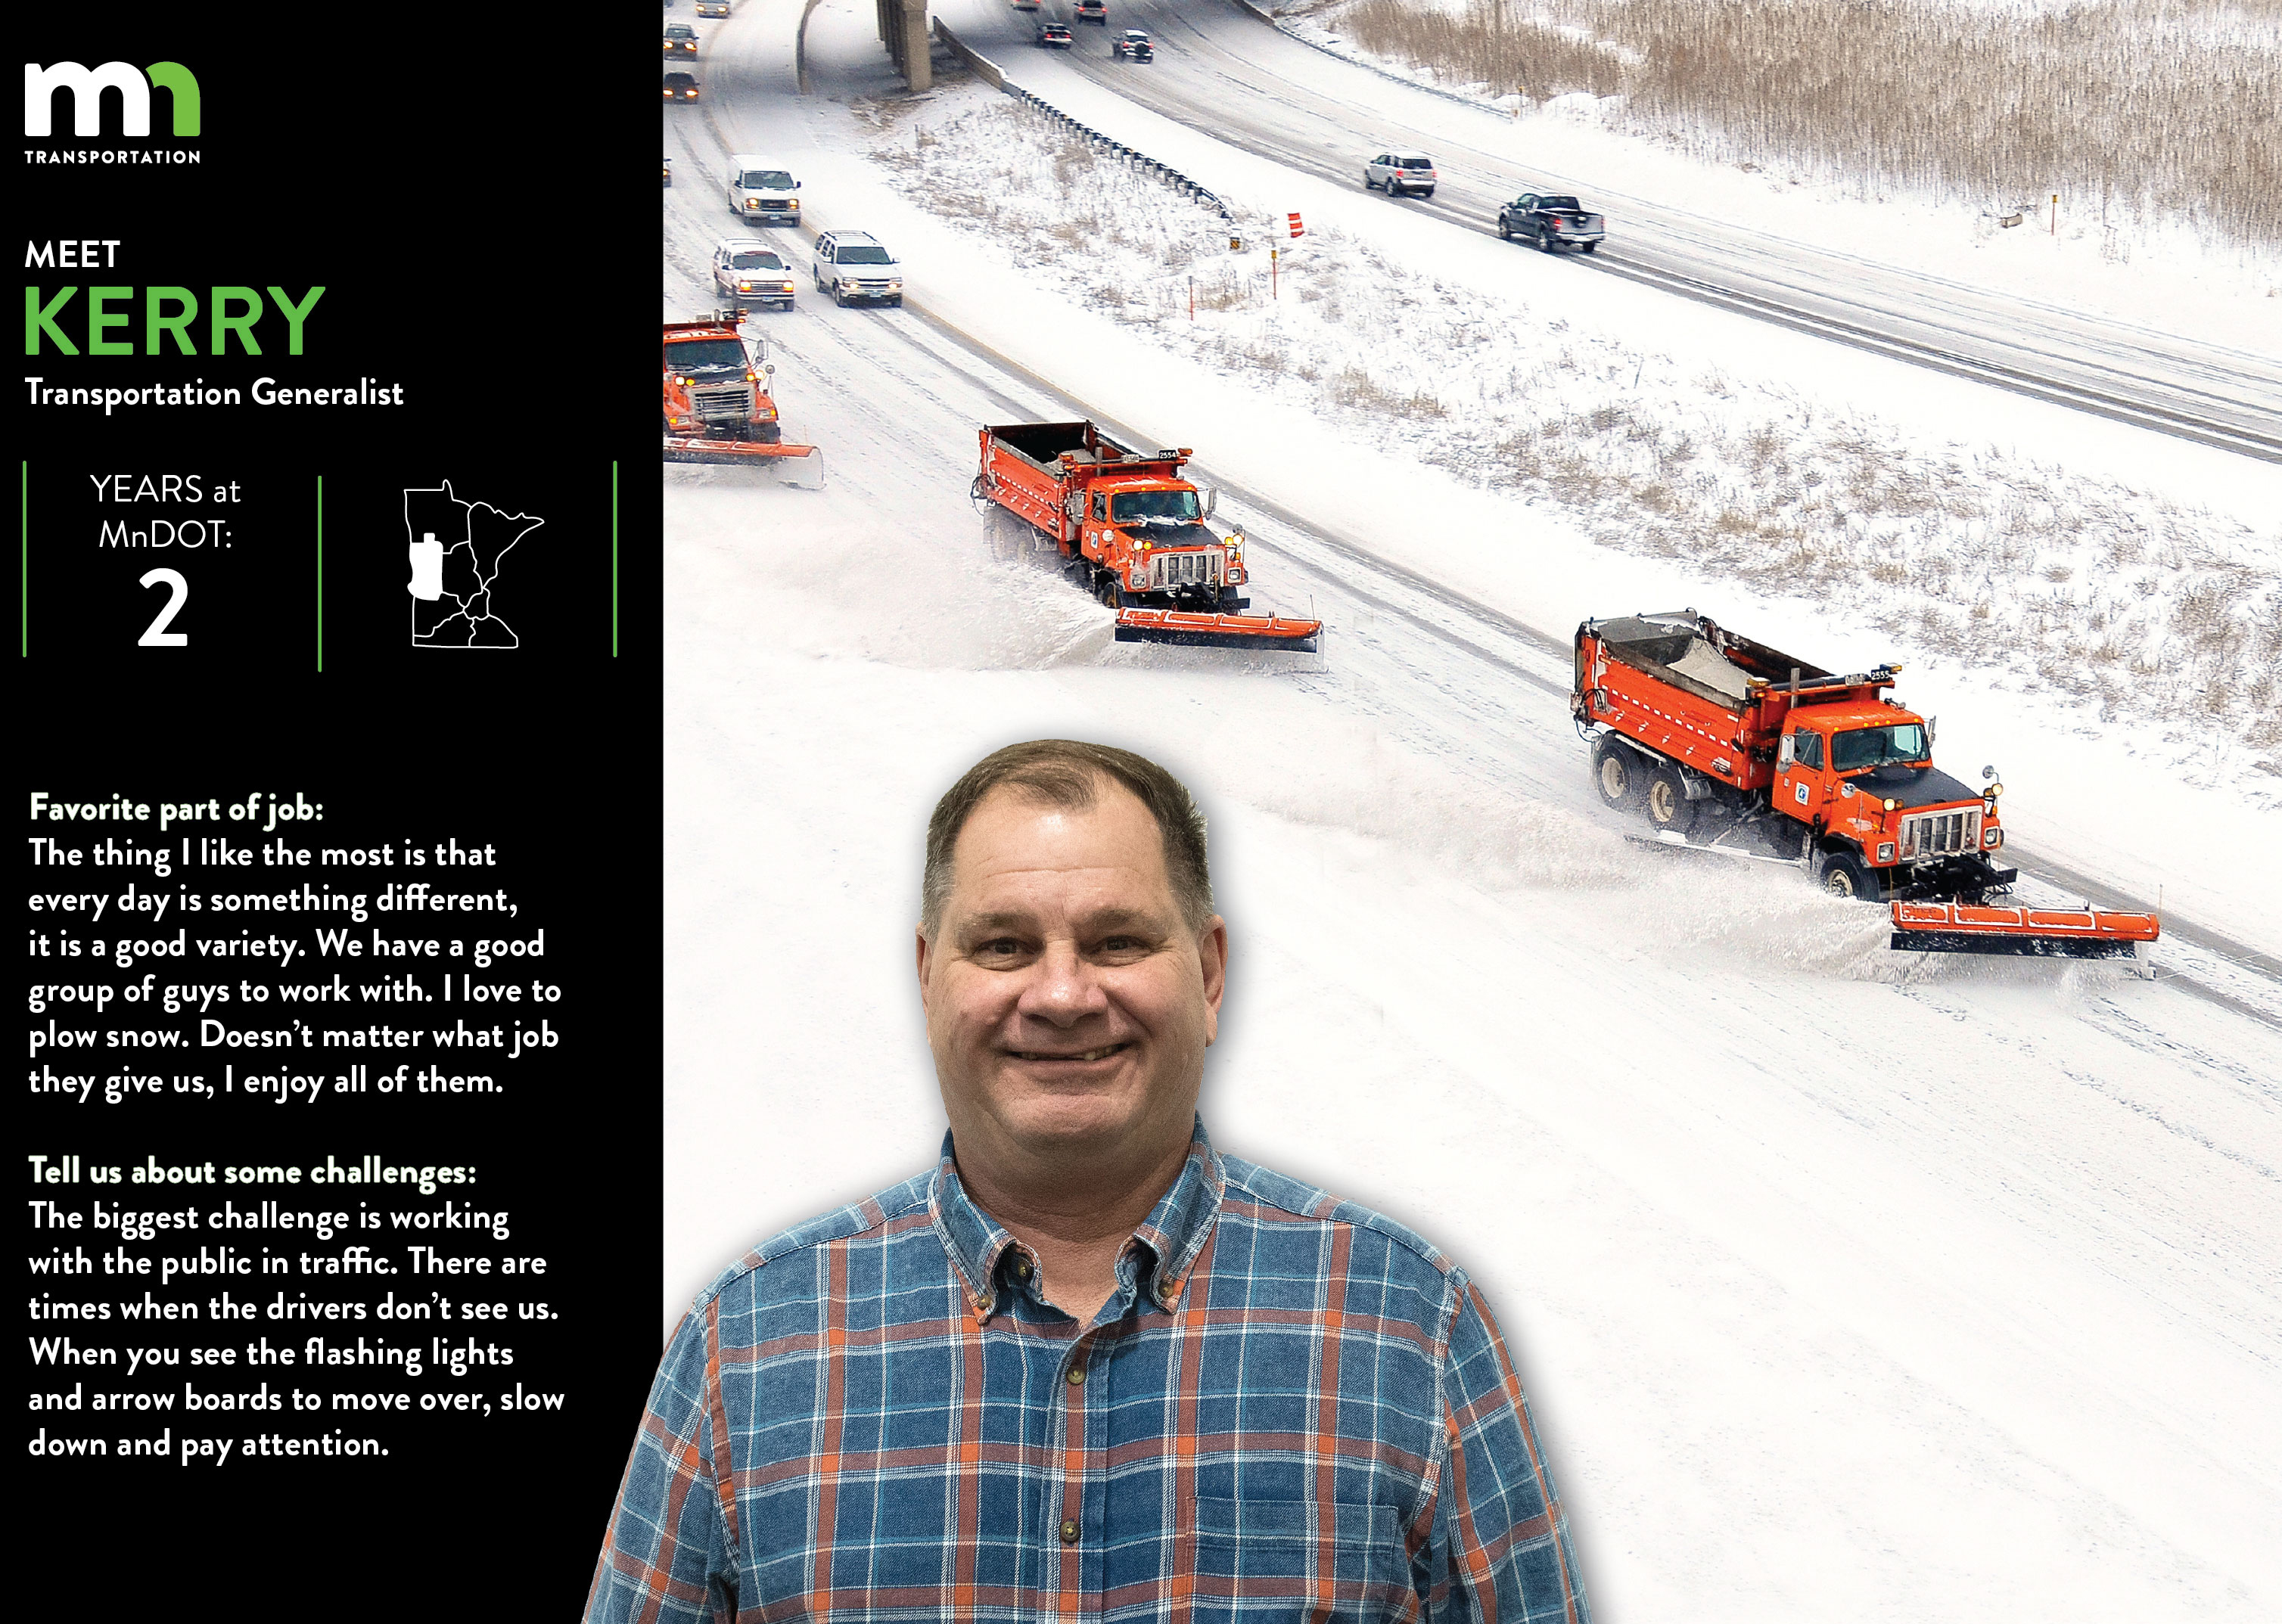 Kerry Donley, a transportation generalist, says the thing he likes most about his job is that every day has something different. WE have a good group of guys to work with. I love to plow snow. Doesn't matter what job they give us, I enjoy all of them. The biggest challenge is working with the public in traffic. There are times when the drivers don't see us. When you see the flashing lights and arrow boards to move over, slow down and pay attention.